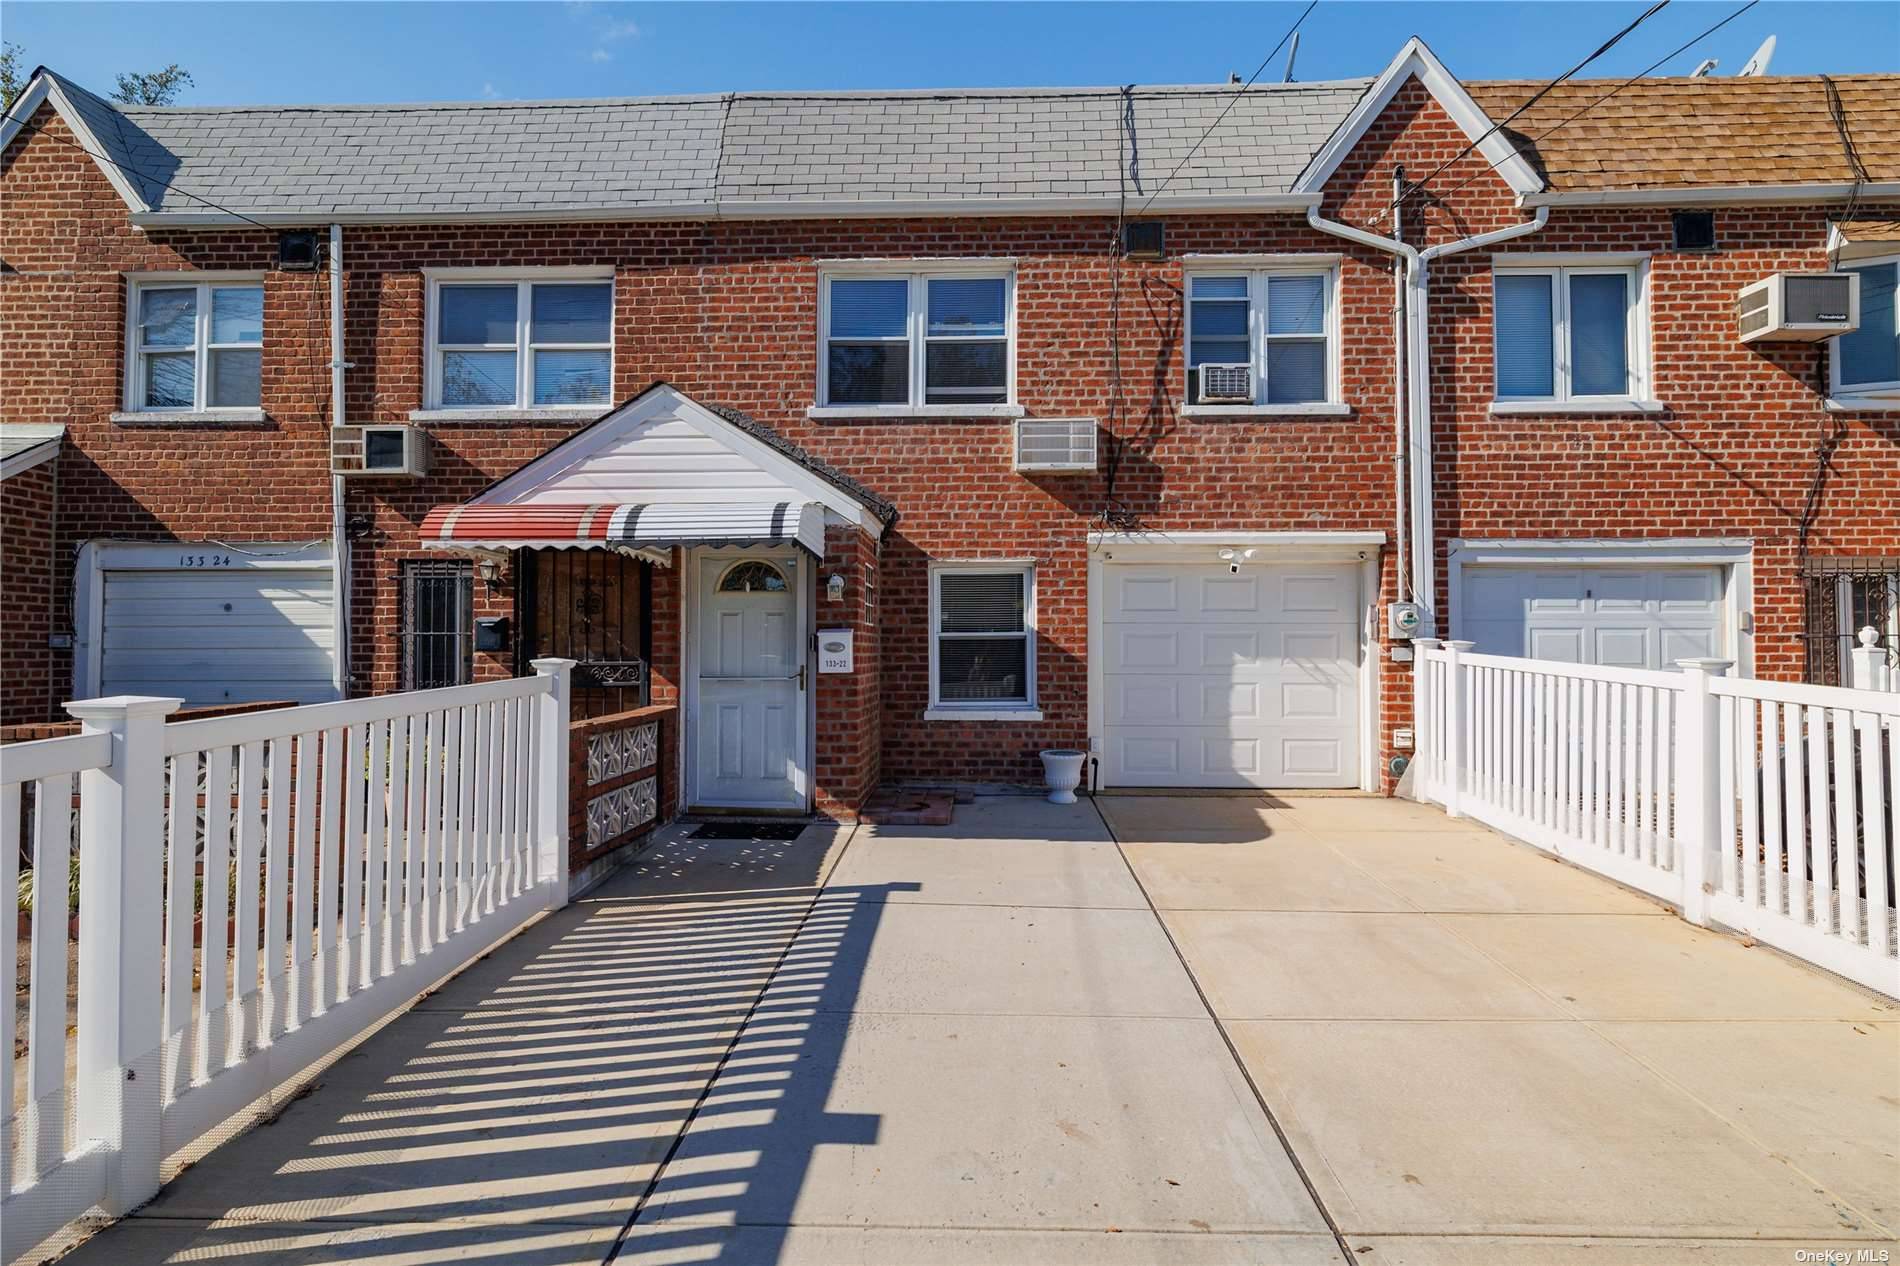 Introducing 133 22 Centreville Street in Ozone Park.